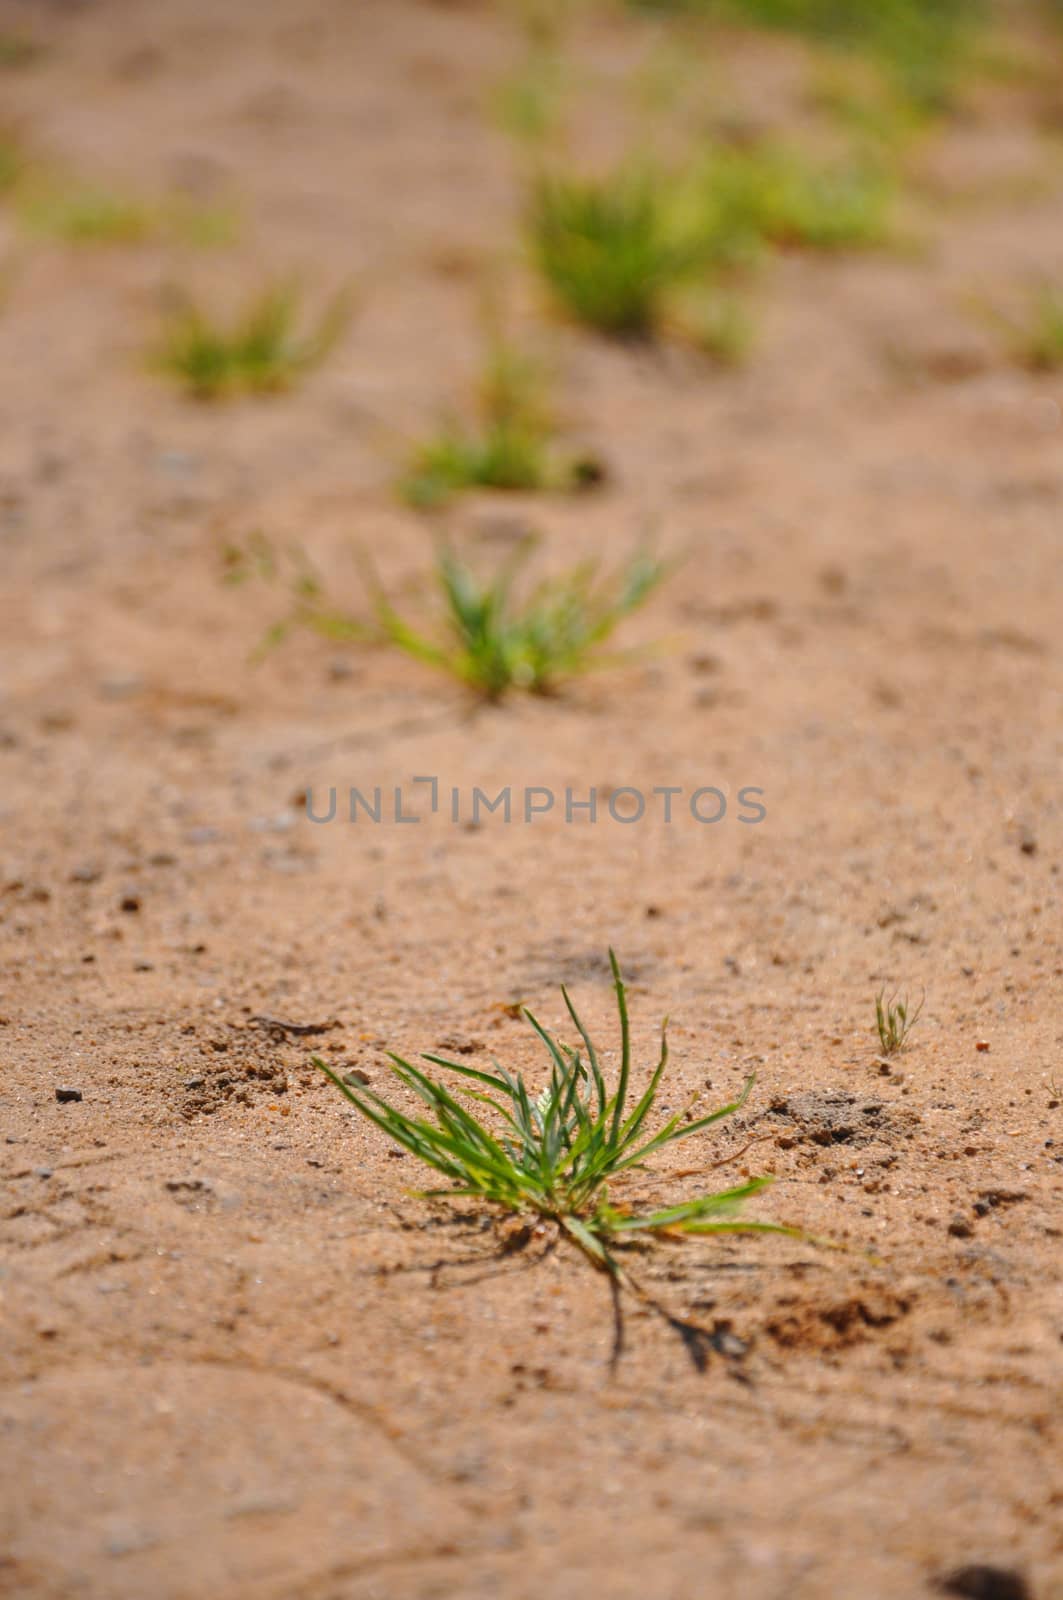 Colorful fresh green young grass growing in the sand close-up, S by Eagle2308